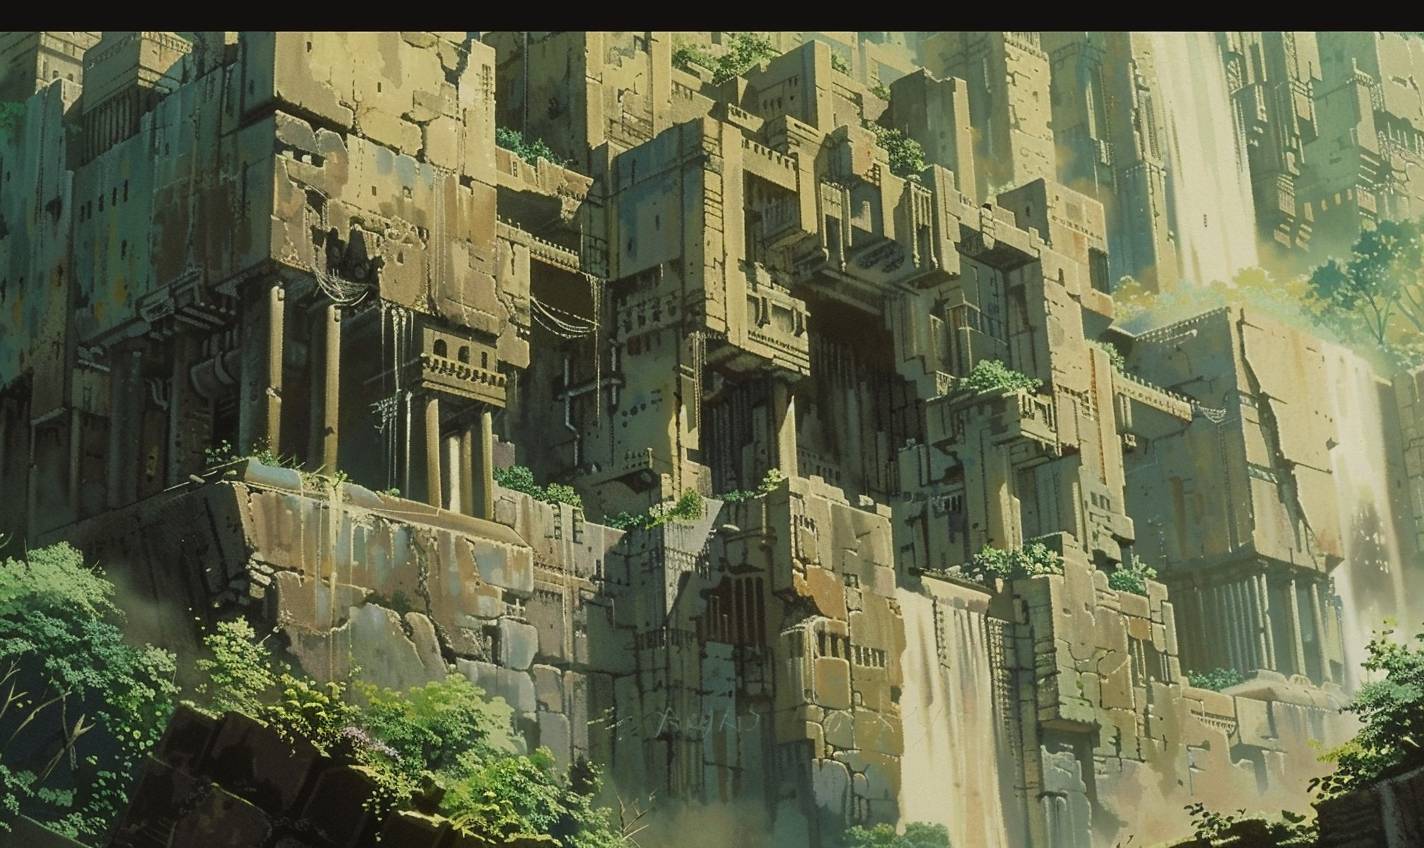 In the style of Yoshiyuki Tomino, forgotten citadel of an ancient civilization